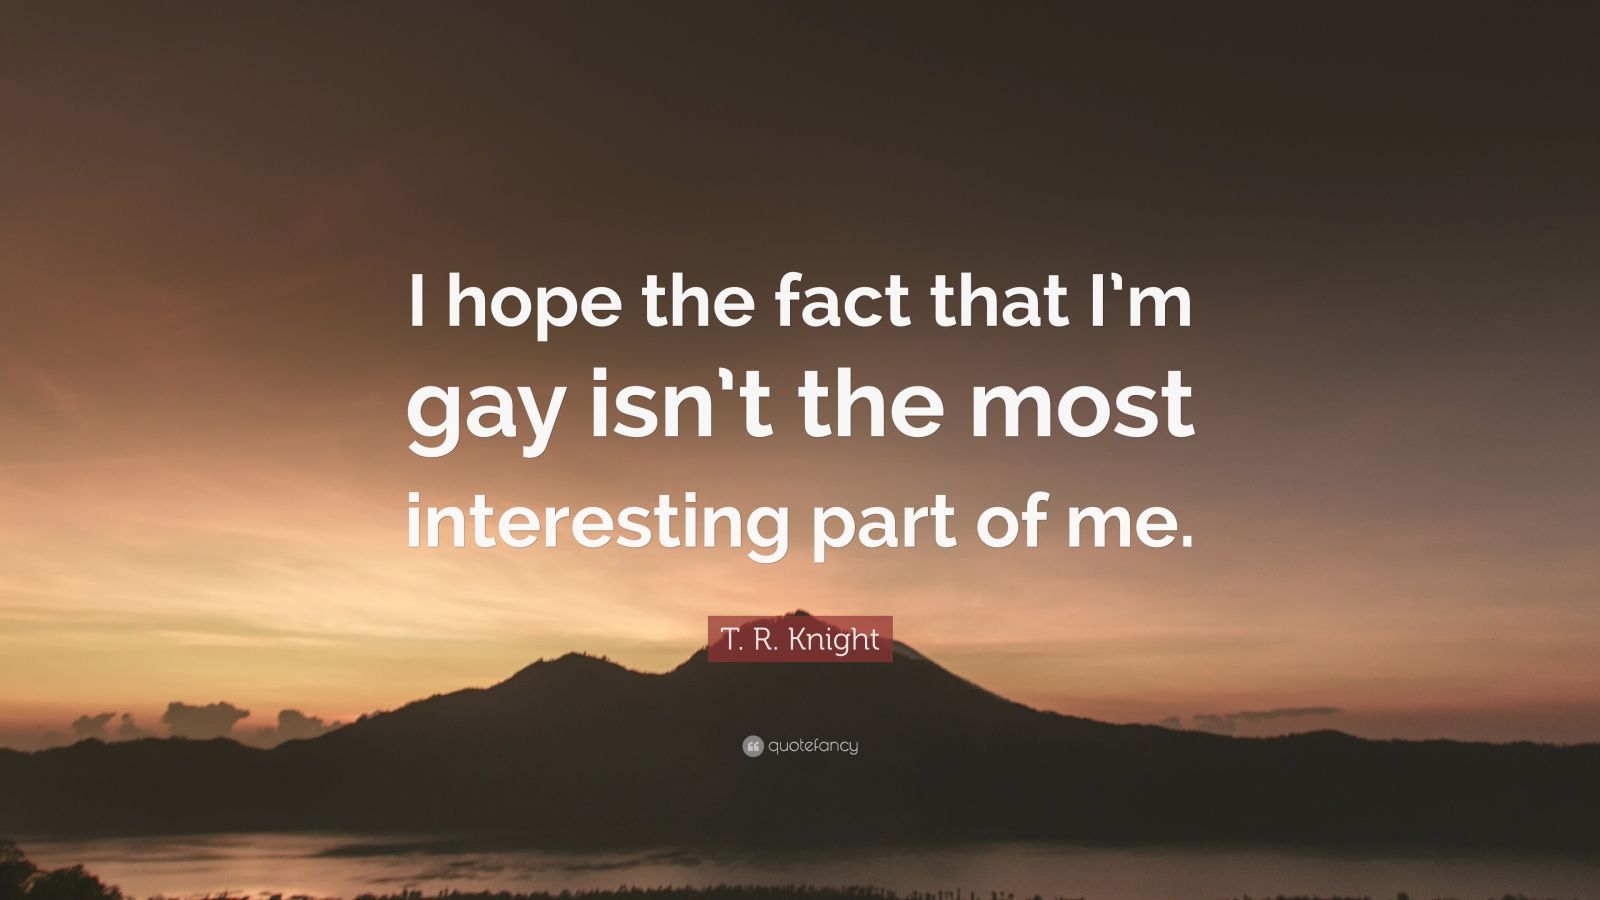 T. R. Knight Quote: “I hope the fact that I'm gay isn't the most